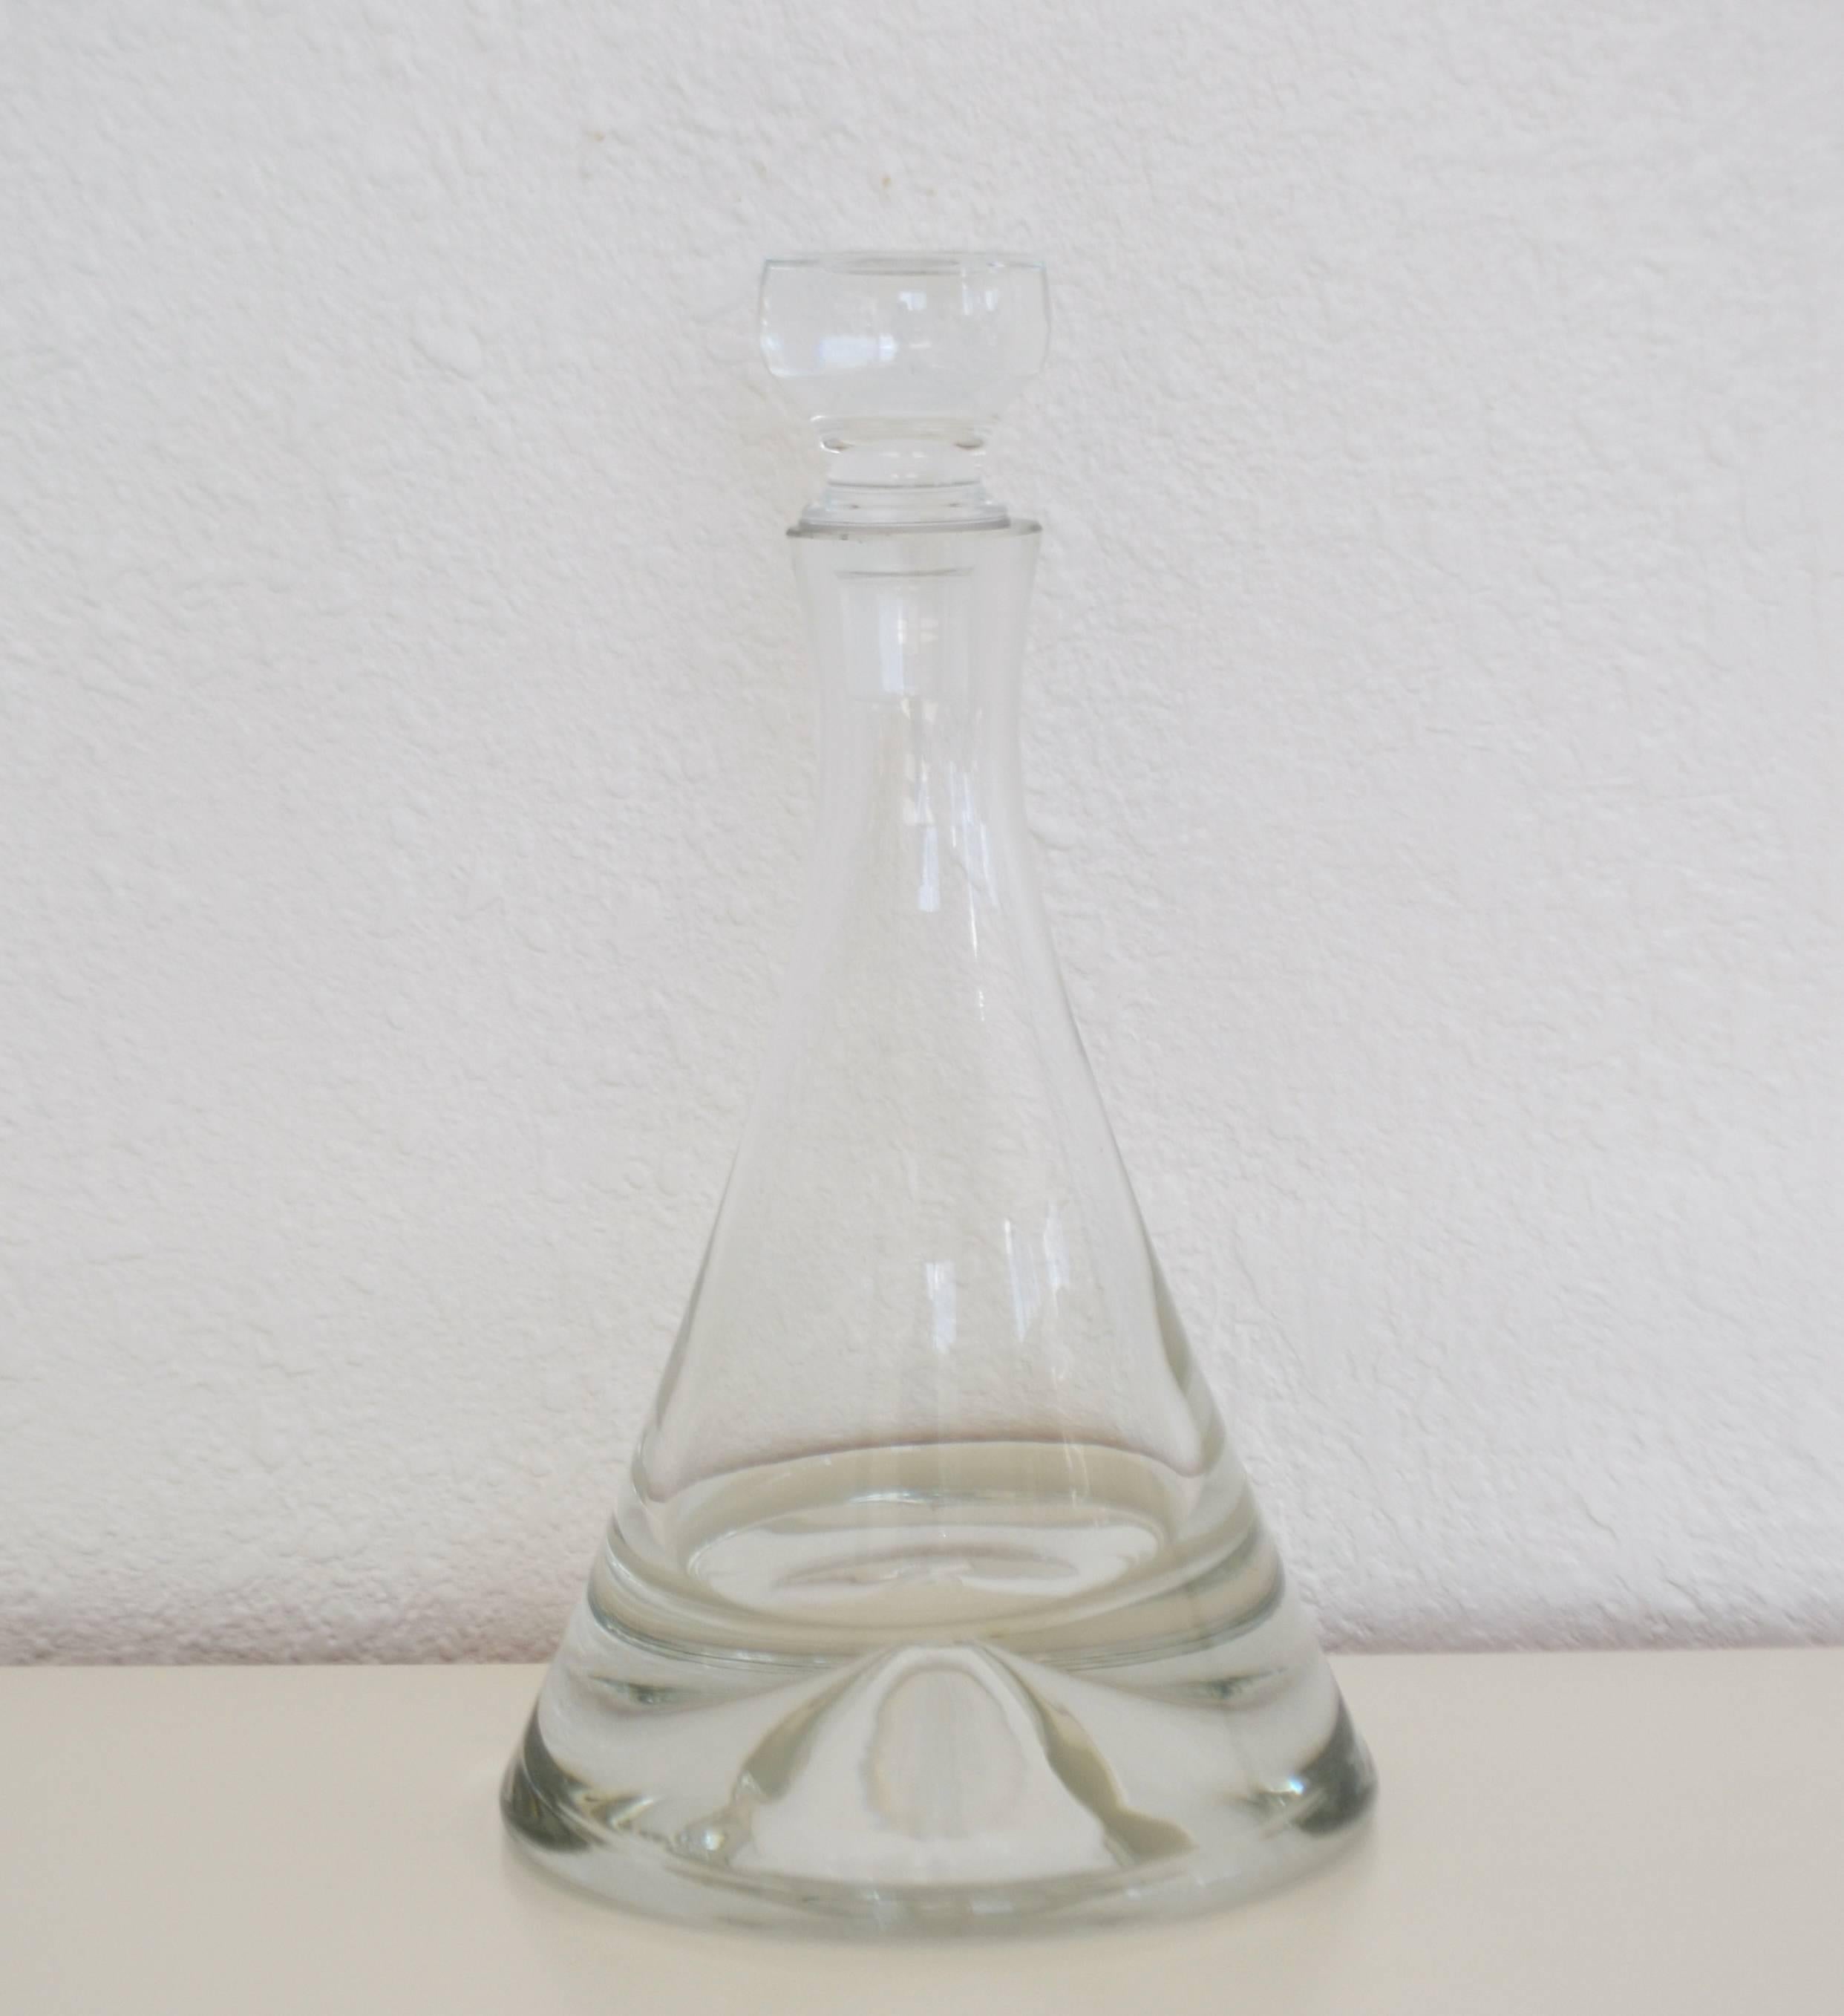 Spectacular Italian Mid-Century decanter, circa 1950s-1960s. This stunning thick clear blown glass decanter is sleekly designed and accented with a clear glass stopper.